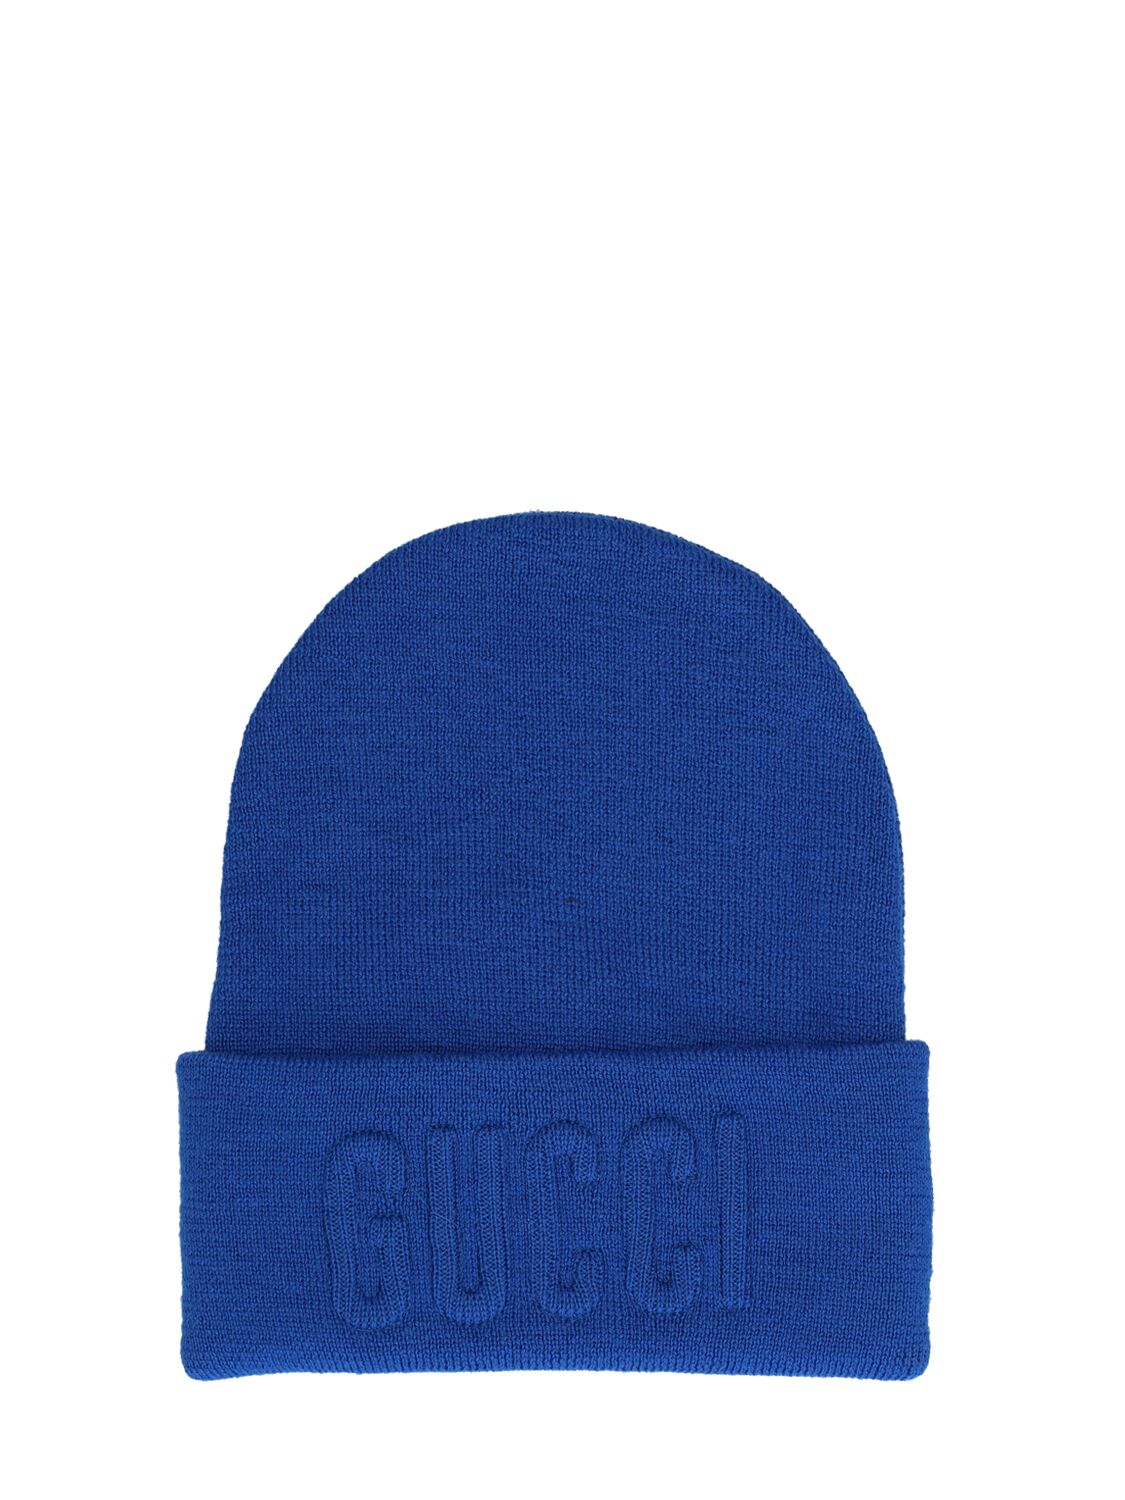 Gucci Embroidered Wool Knit Beanie In Bright Blue